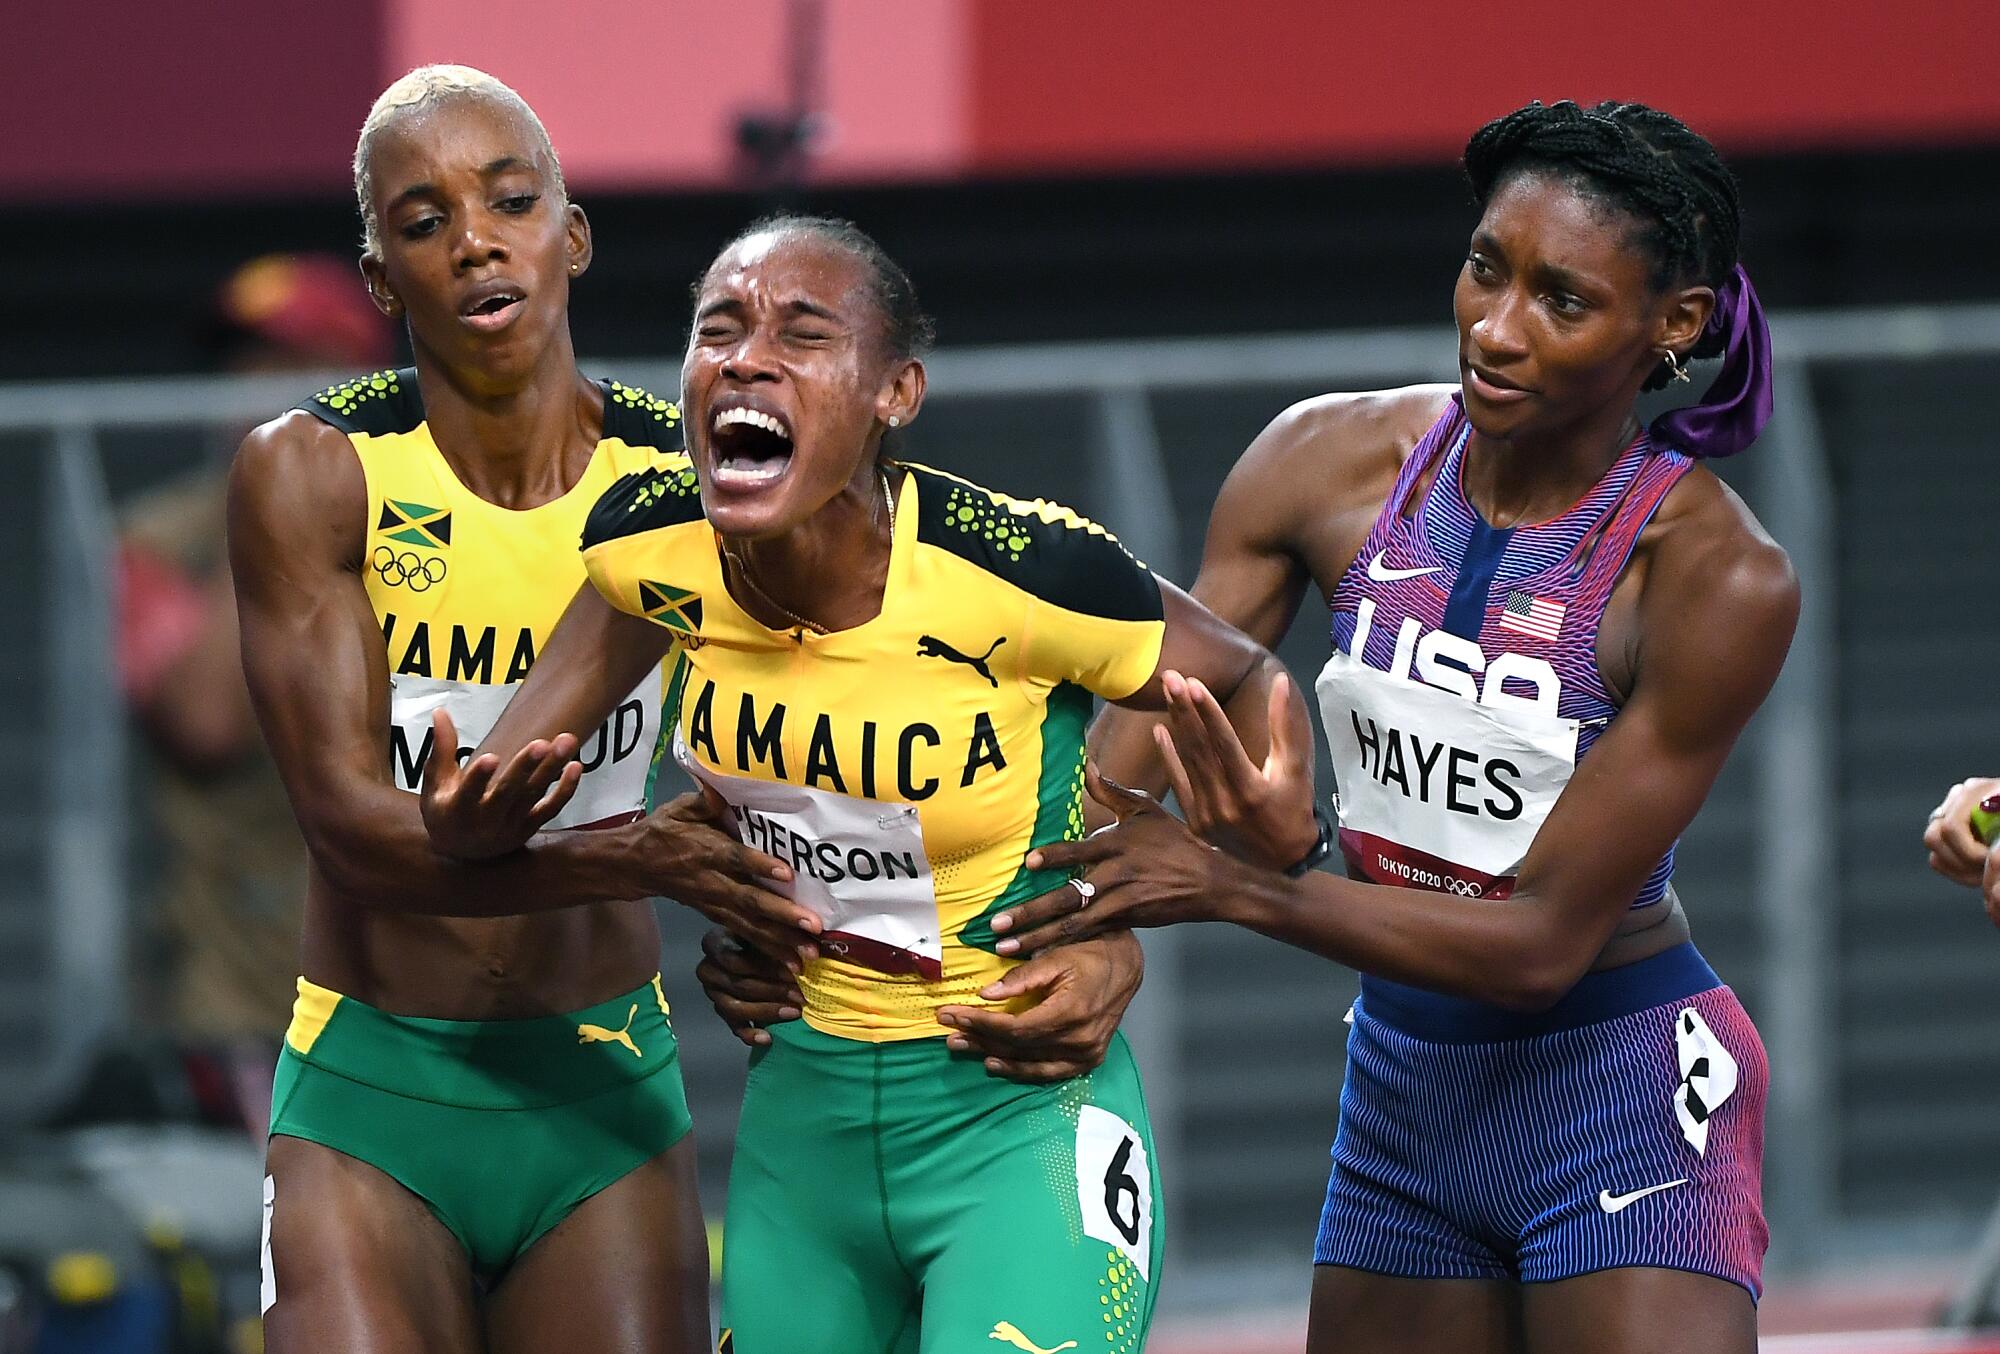 Jamaica's Stephenie McPherson cries out in pain after the 400-meter race.